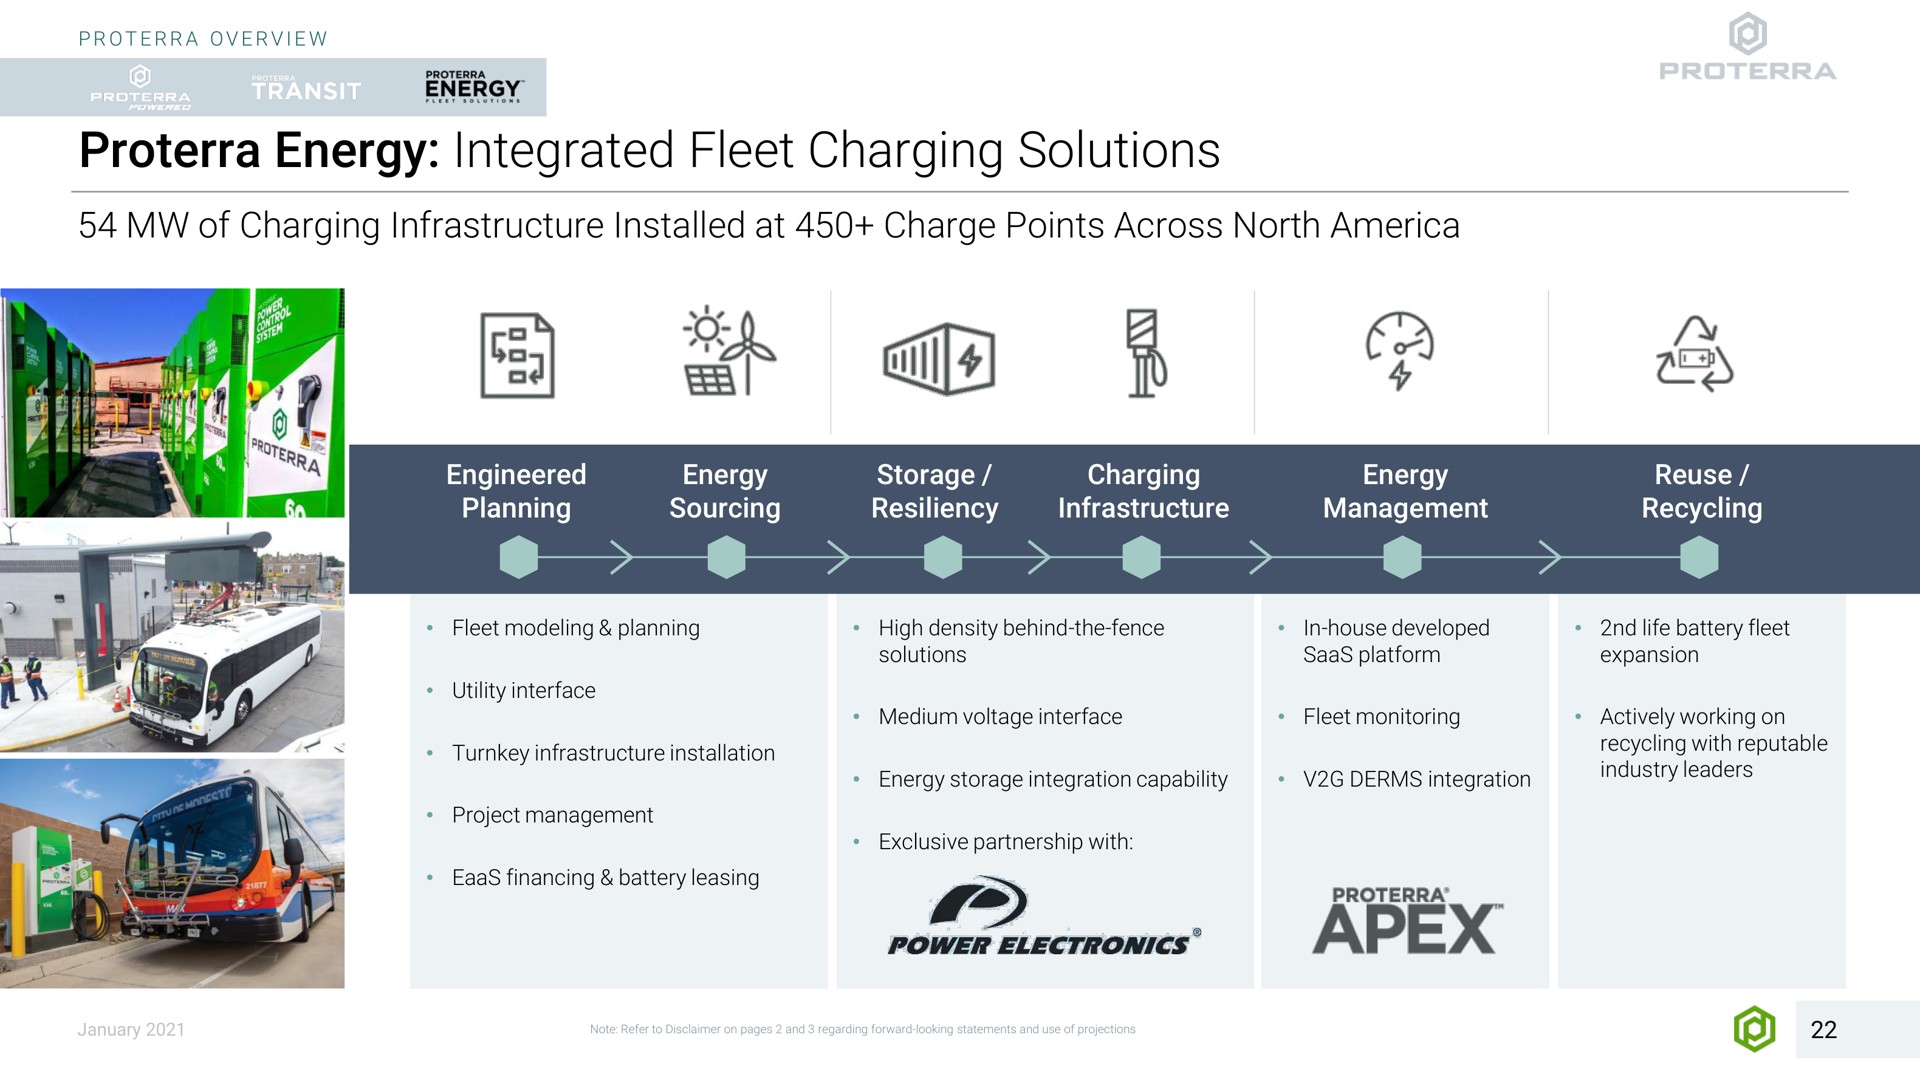 energy integrated fleet charging solutions of infrastructure at charge points across north engineered planning state sourcing storage resiliency infrastructure management recycling modeling planning utility interface turnkey infrastructure installation financing battery leasing high density behind the fence medium voltage interface storage integration capability exclusive partnership with power electronics house developed platform monitoring integration life battery actively working on recycling with reputable industry leaders | Proterra